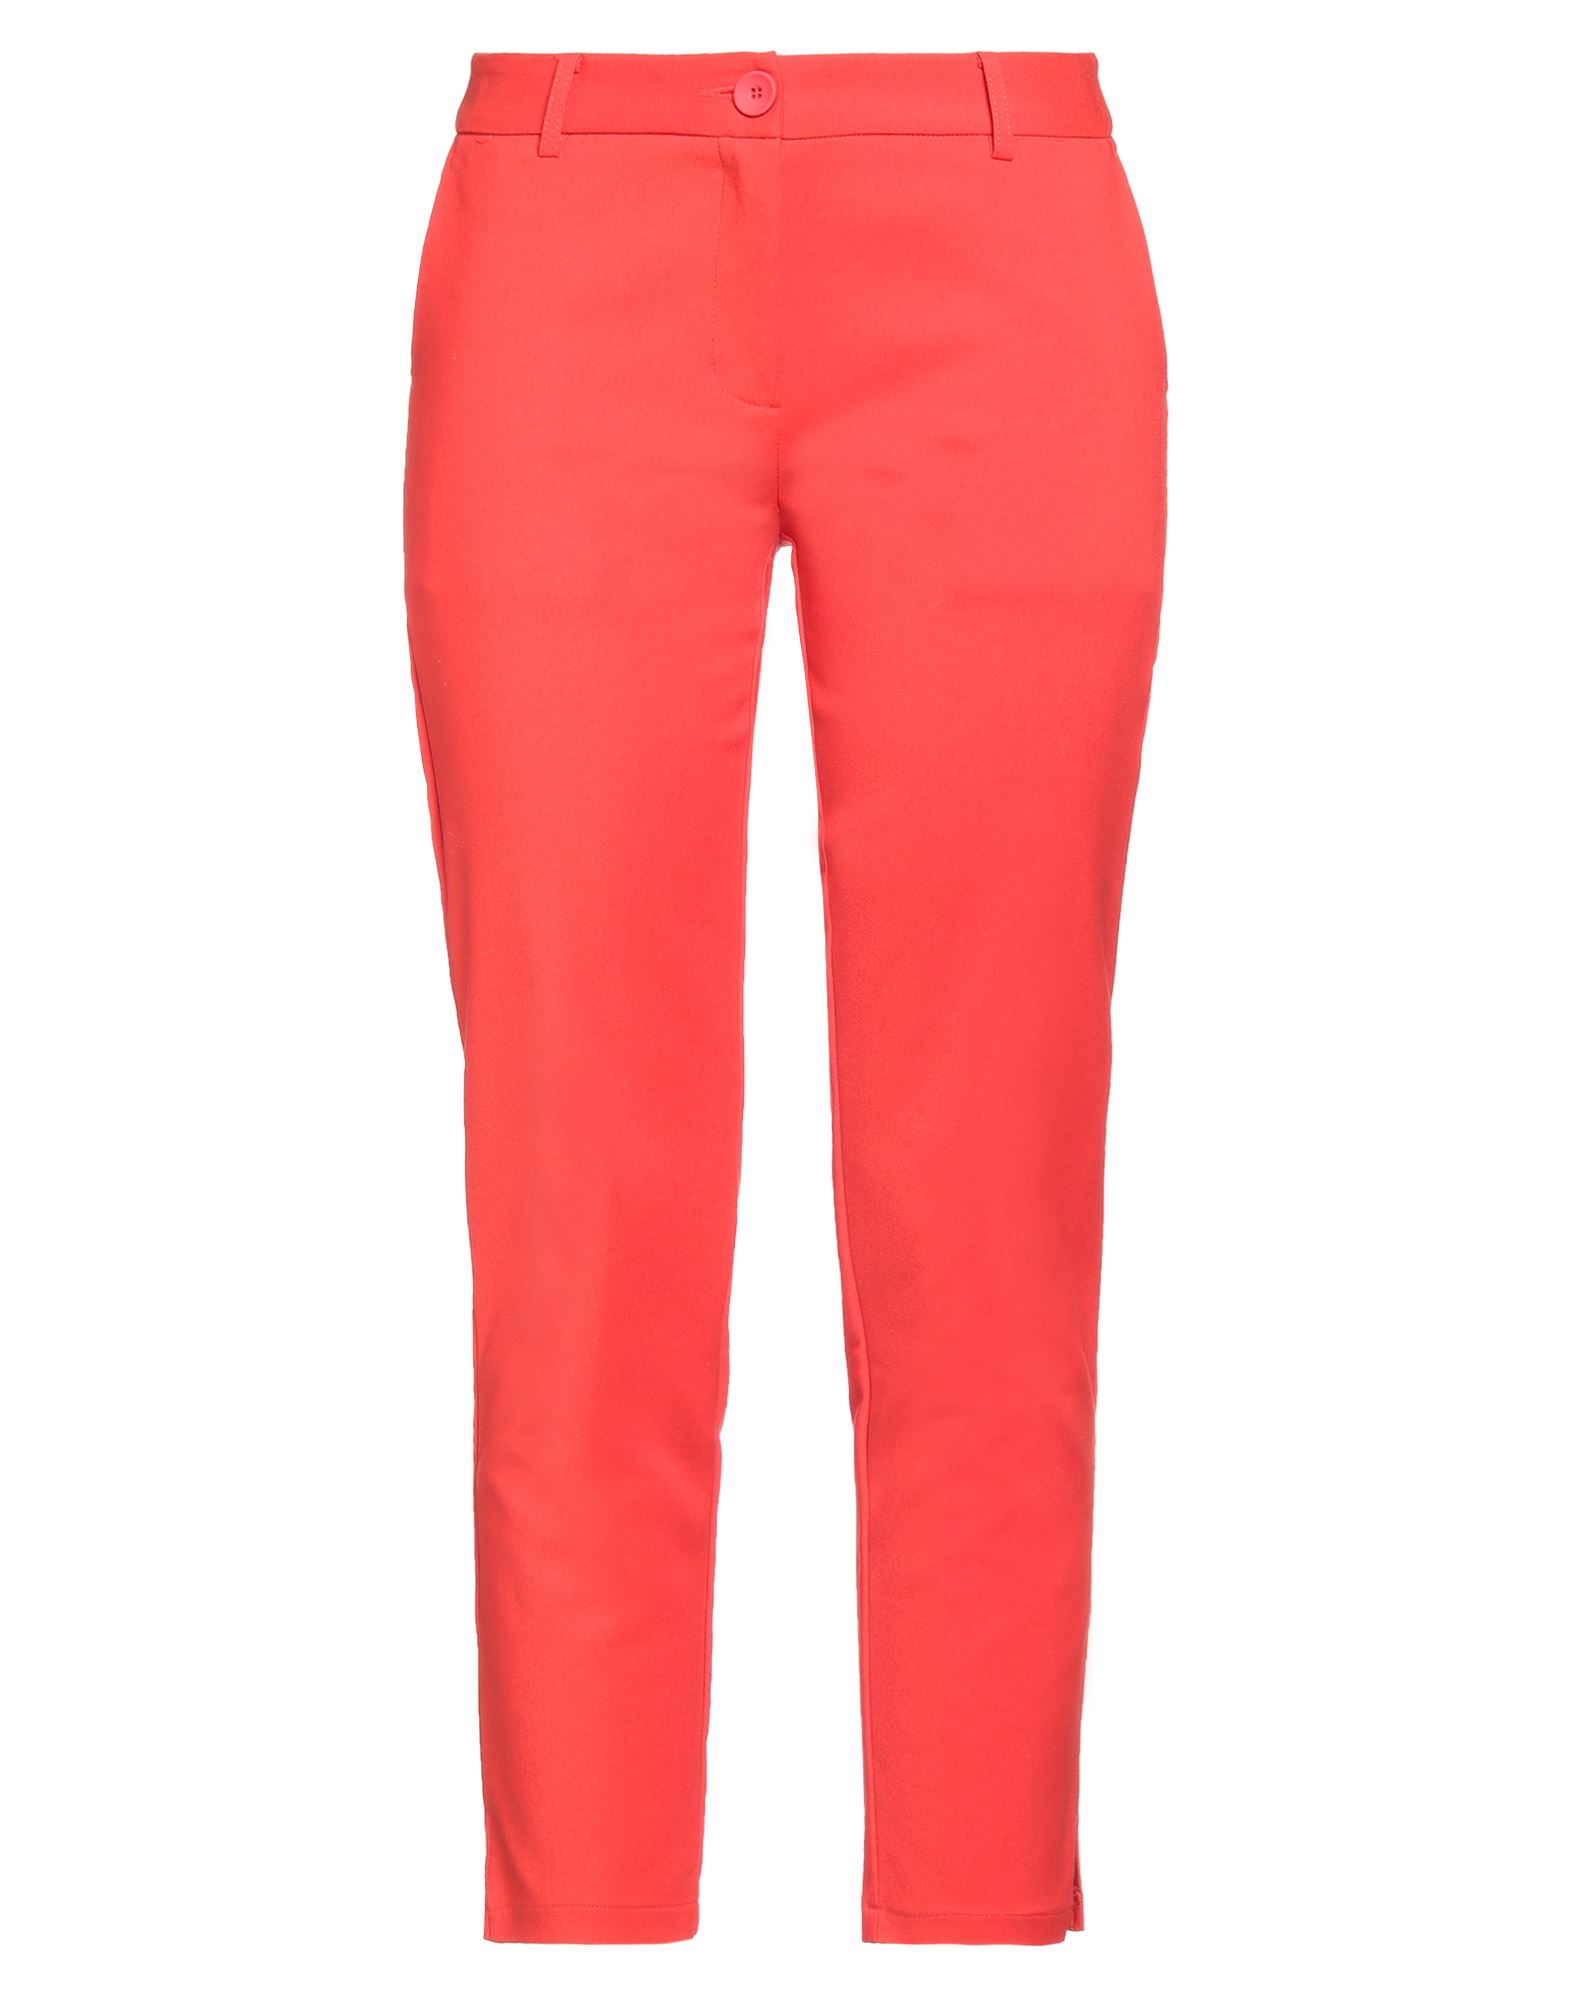 Anonyme Designers Pants In Red